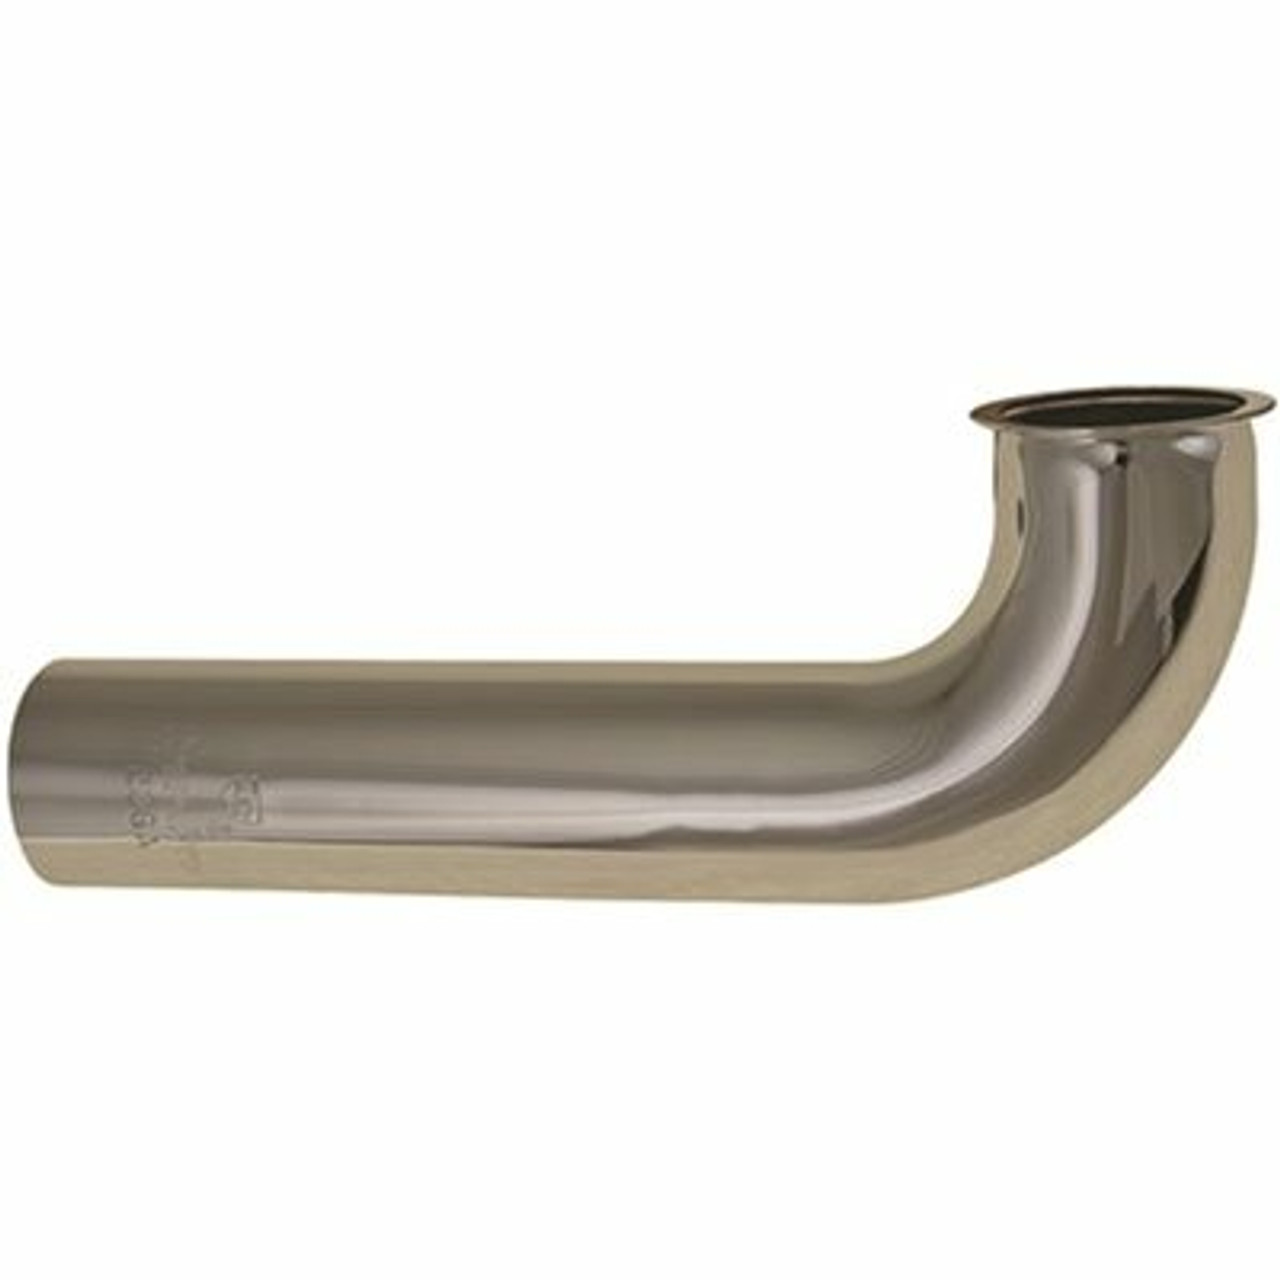 Premier Waste Arm 1-1/2 In. X 7 In. Brass 22-Gauge Direct Connect Chrome